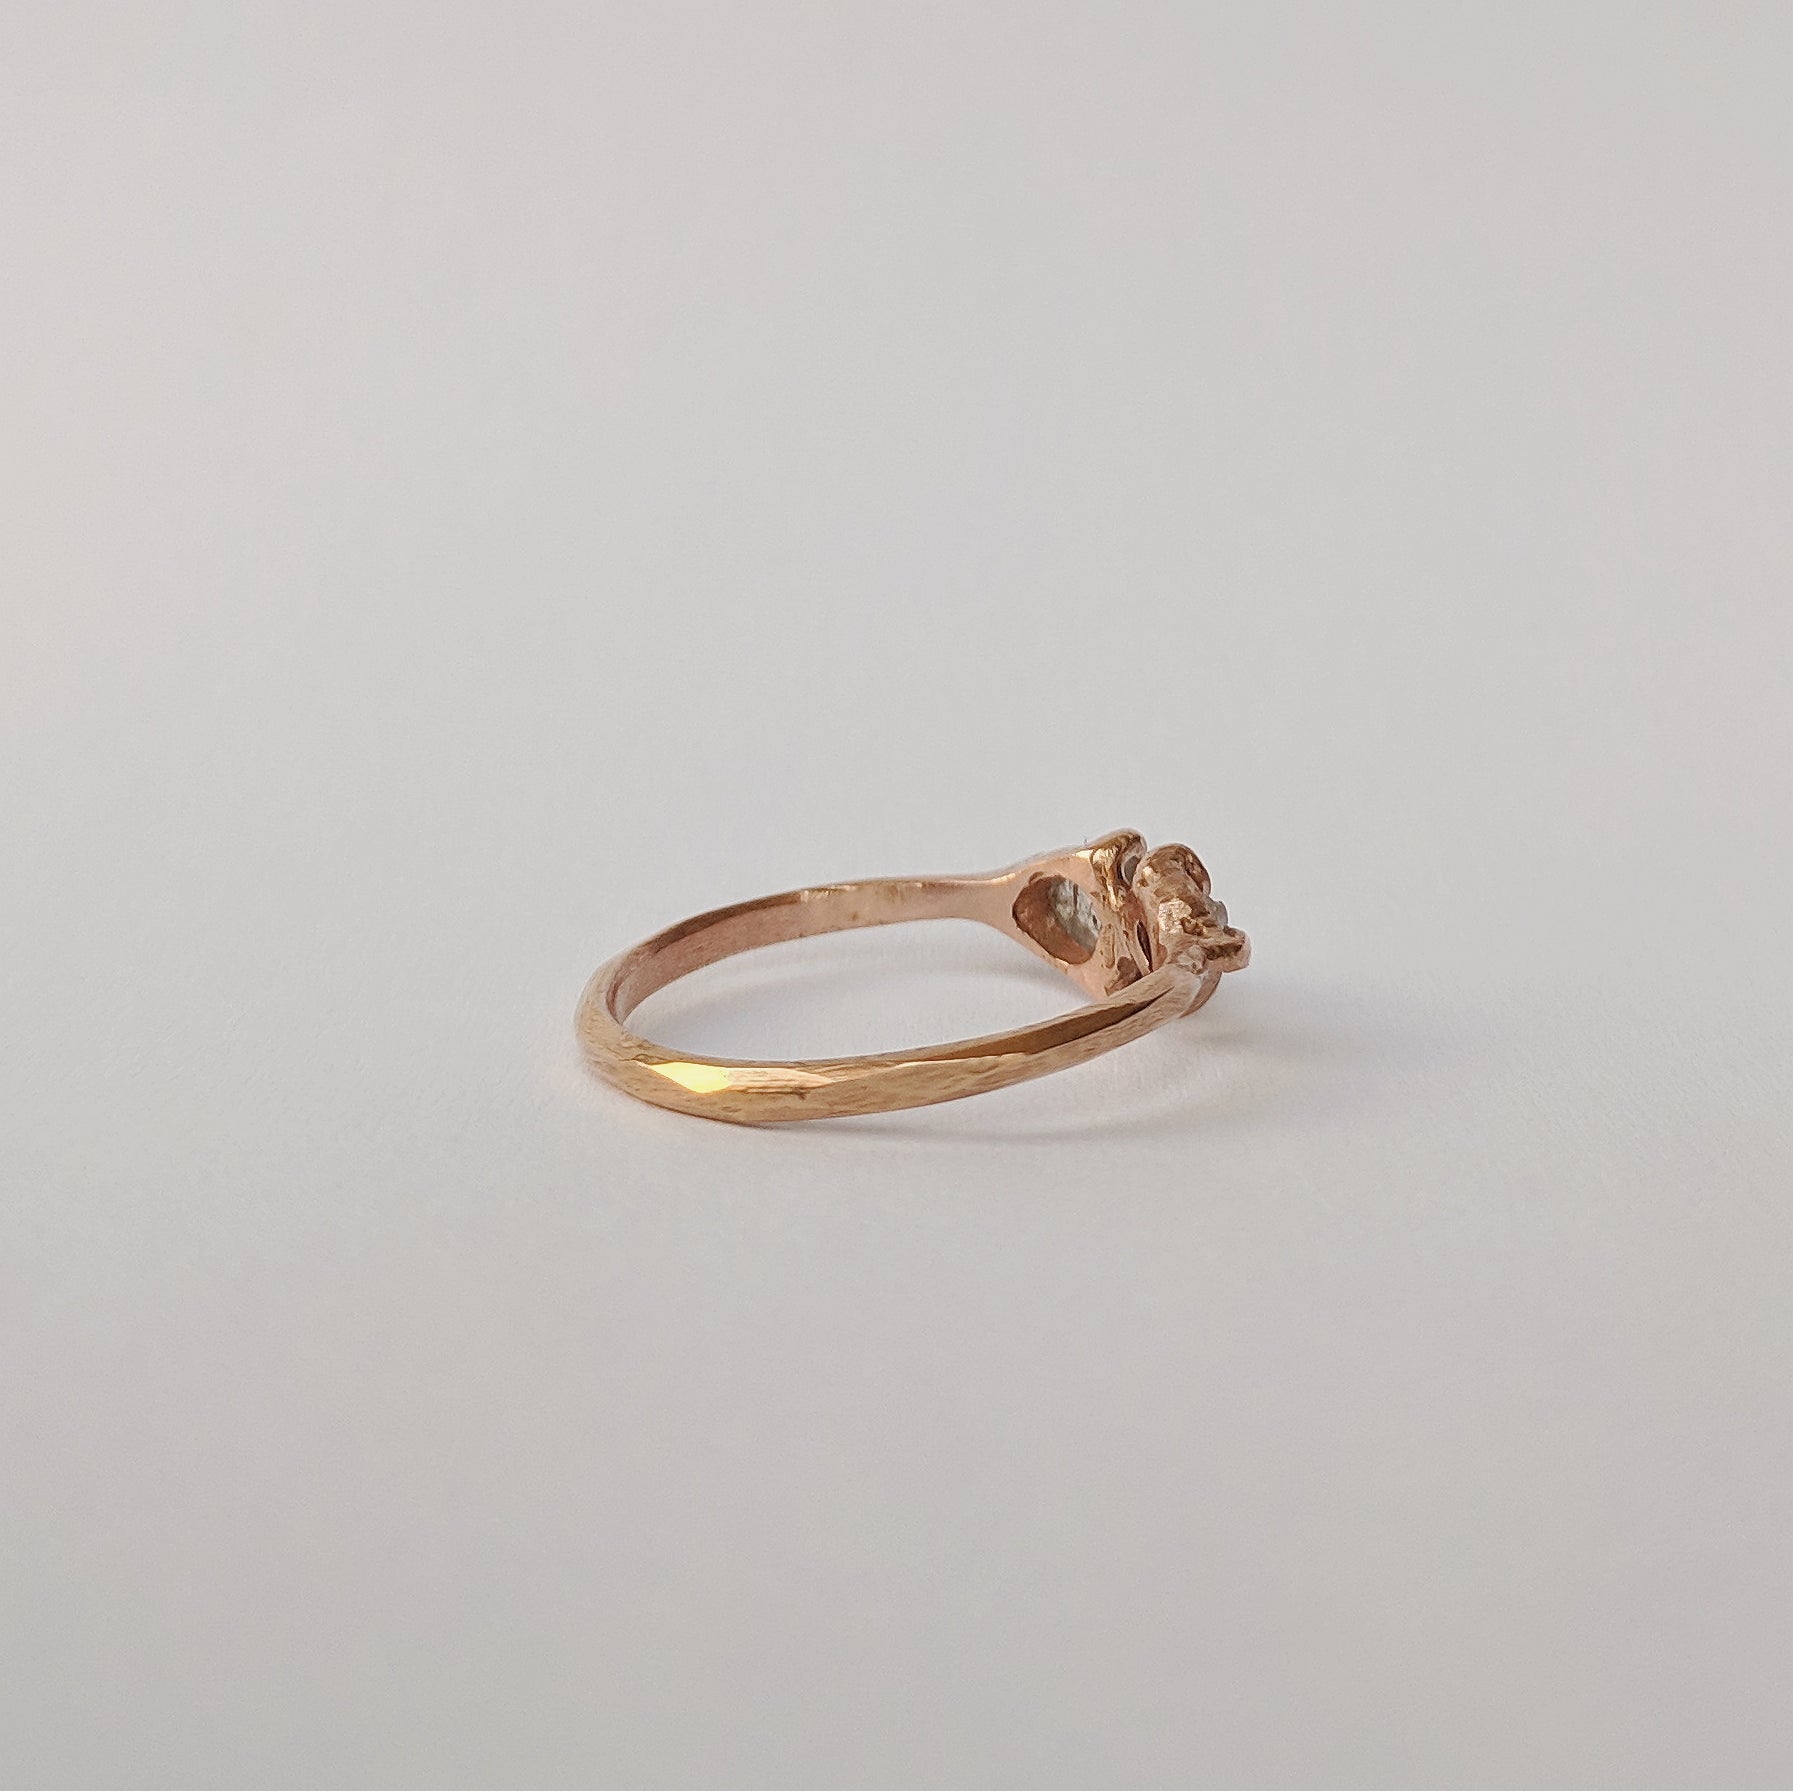 Rough and refined diamond ring, rose gold